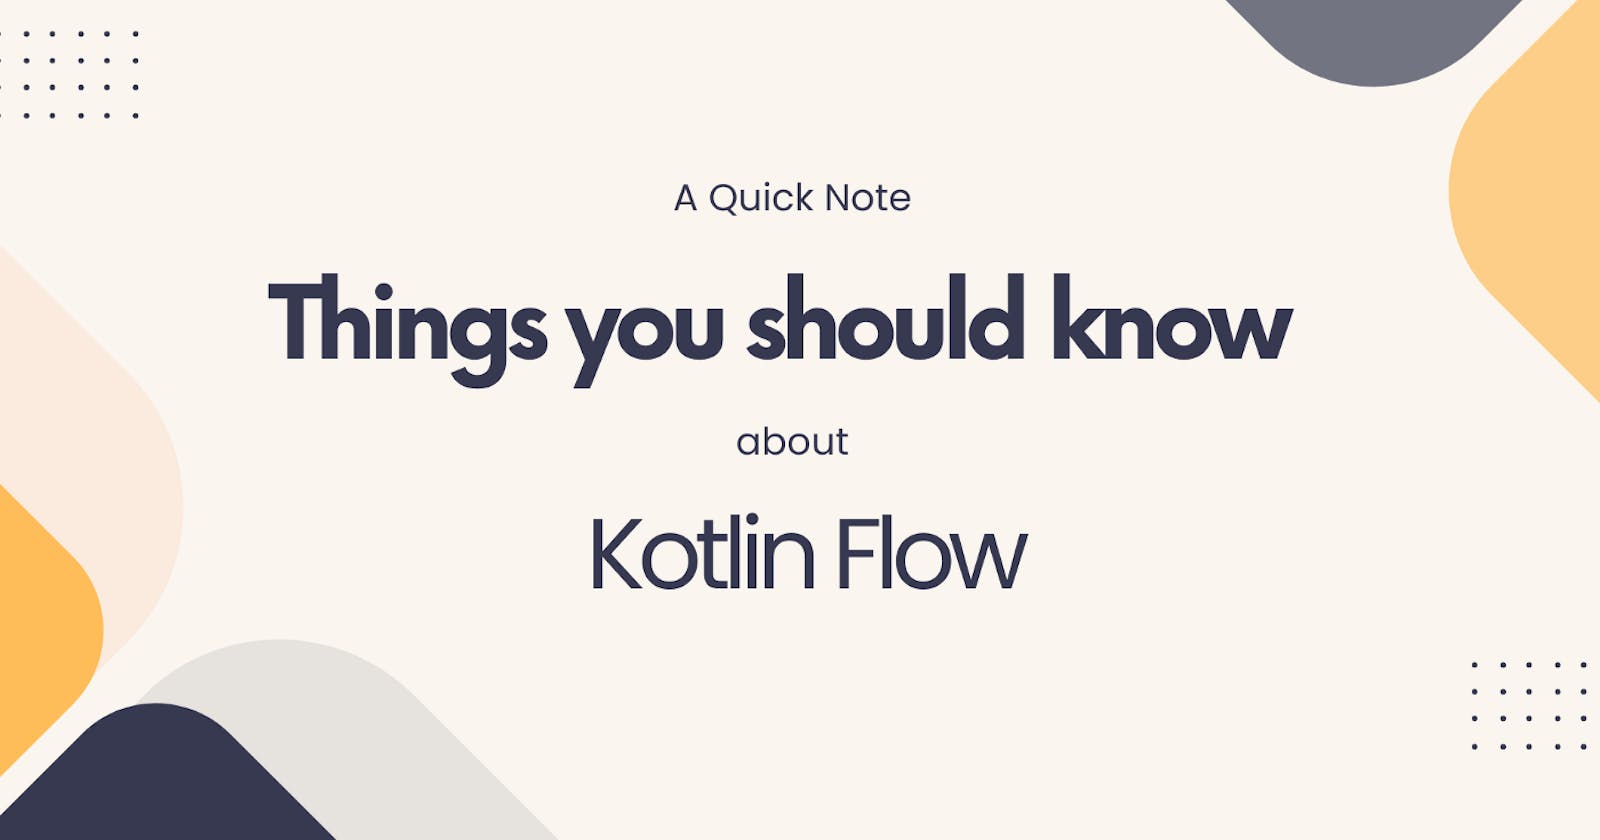 19 Things to Know About Kotlin Flow — A Quick Note